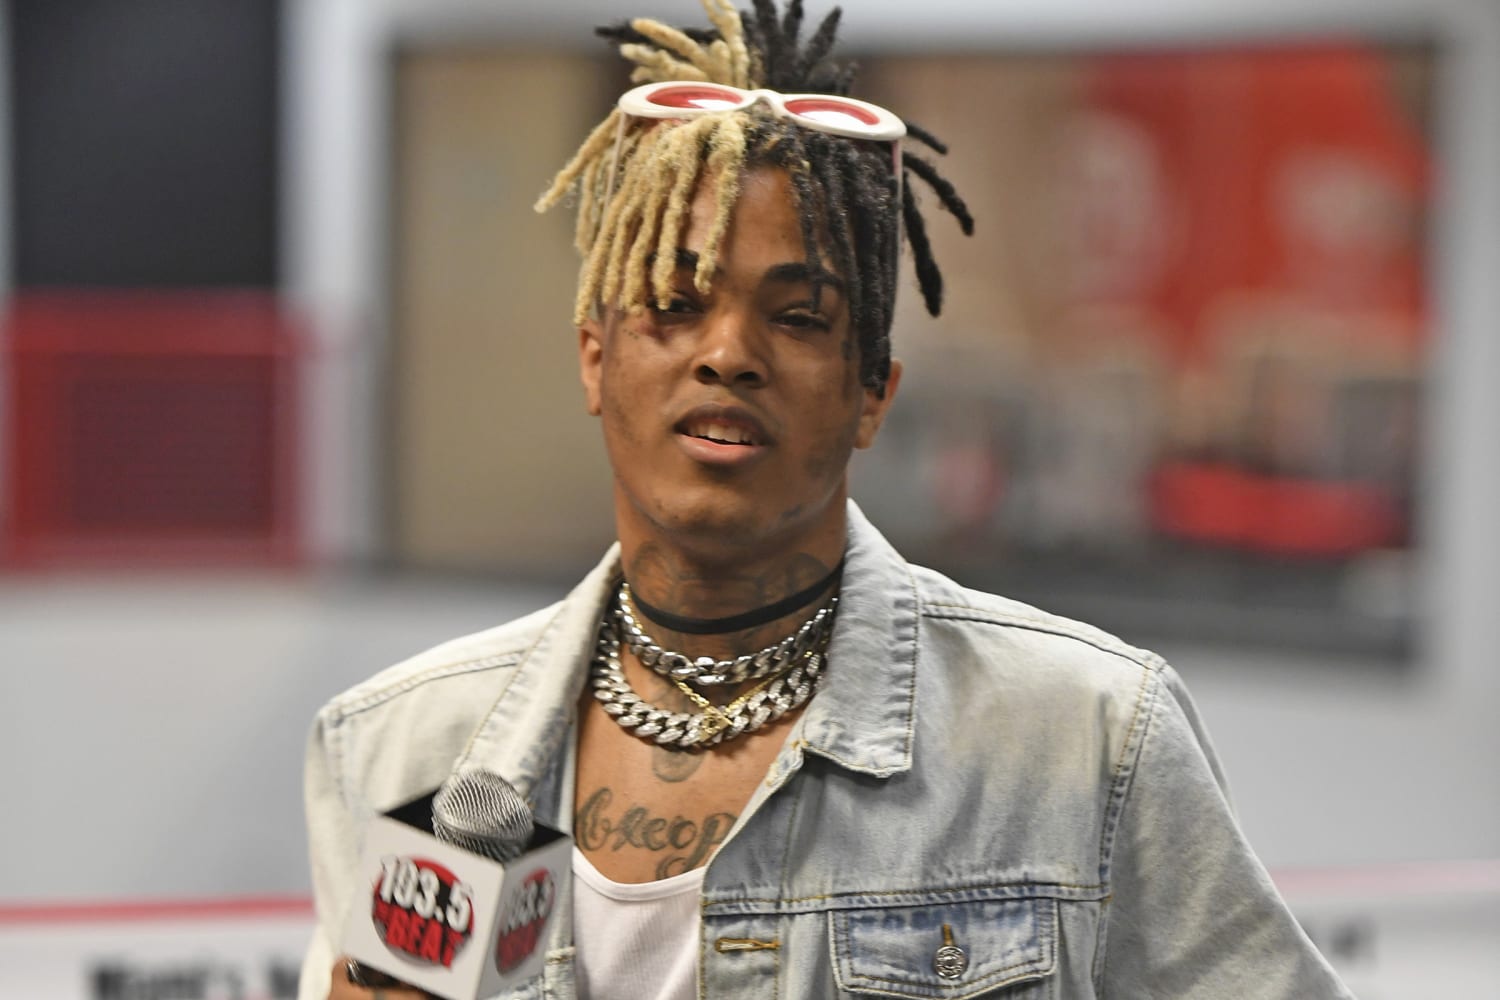 A jury has found three people guilty of manslaughter in the death of rapper XXXTentacion.